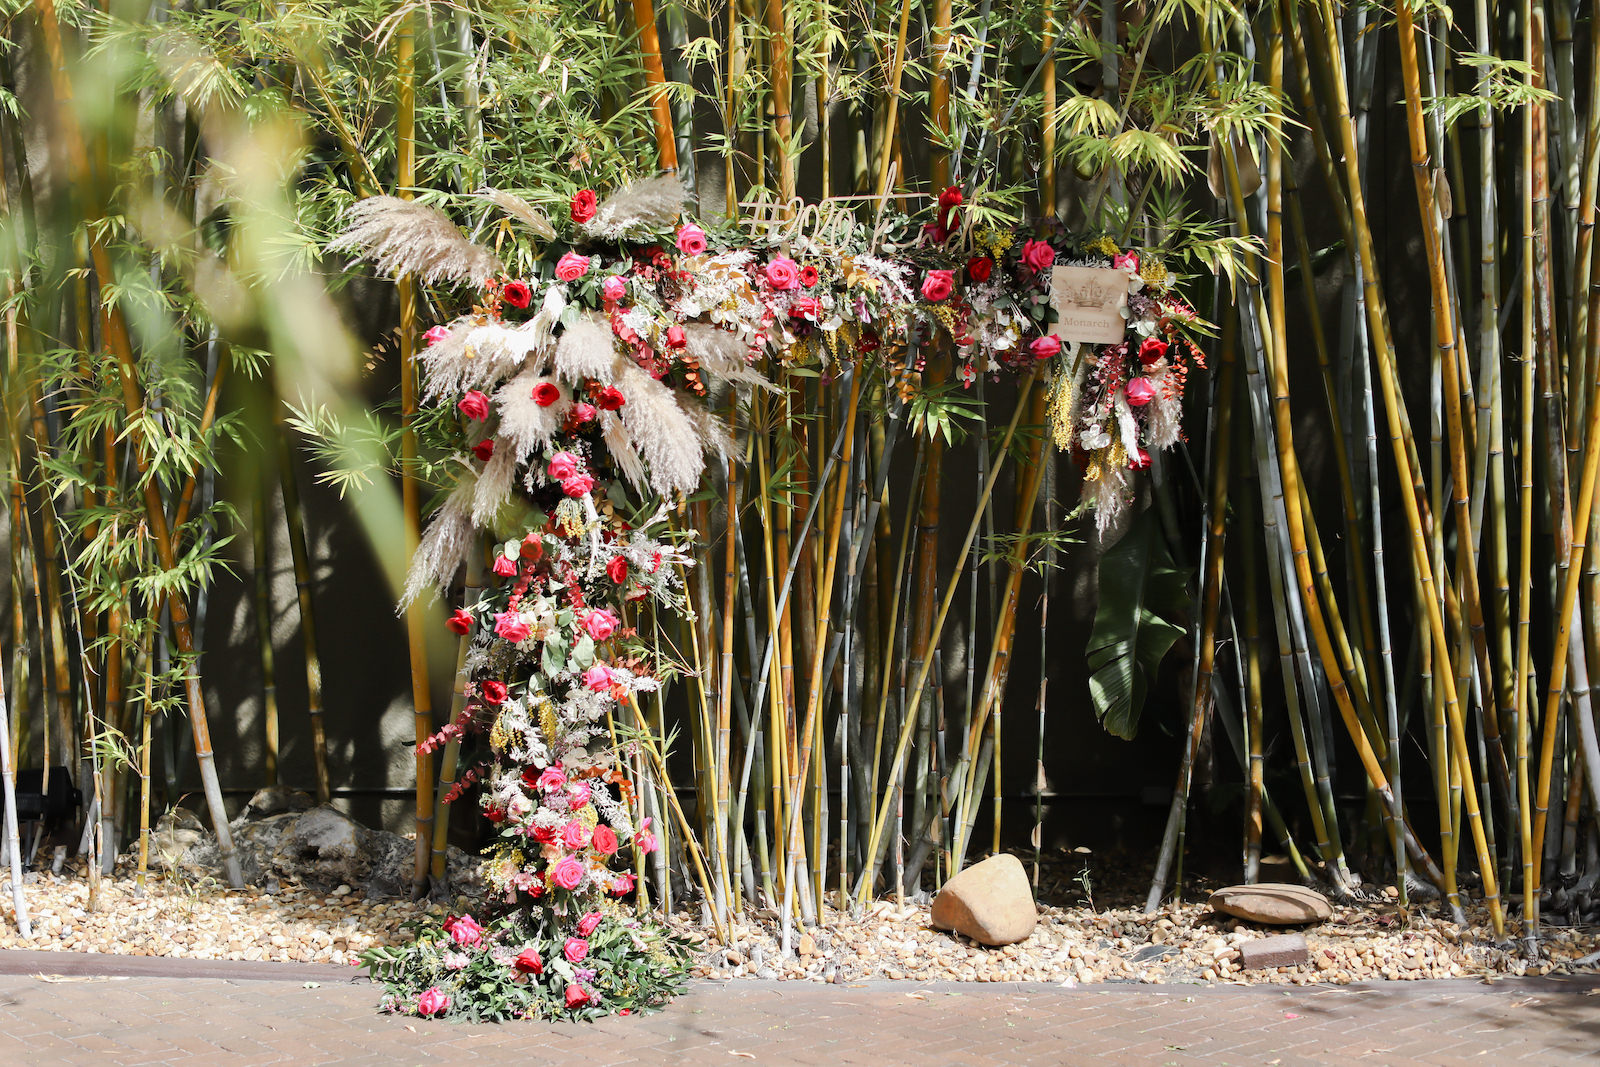 Whimsical Boho Wedding Arch Floral Arrangement with Pampas Grass and Vibrant Roses | Tampa Wedding Florist Monarch Events and Design